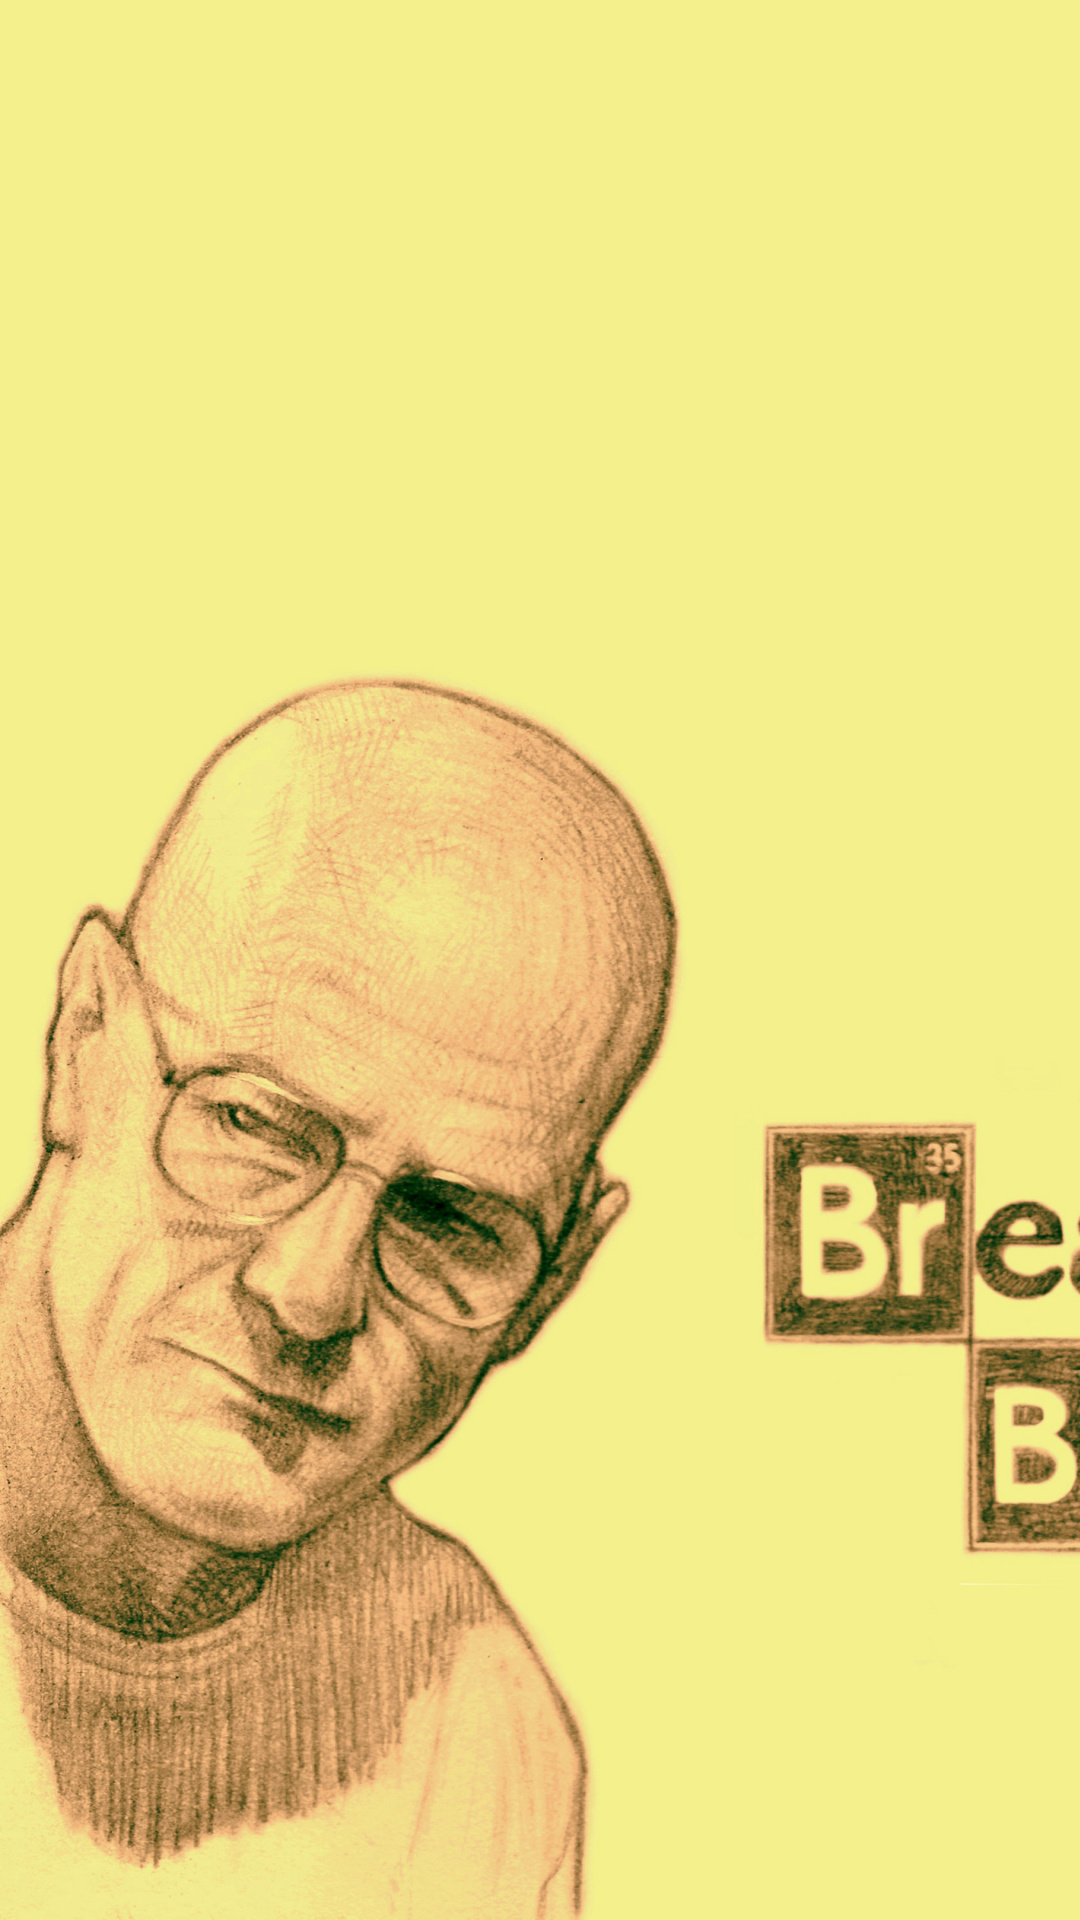 breaking bad wallpaper,face,forehead,head,text,chin